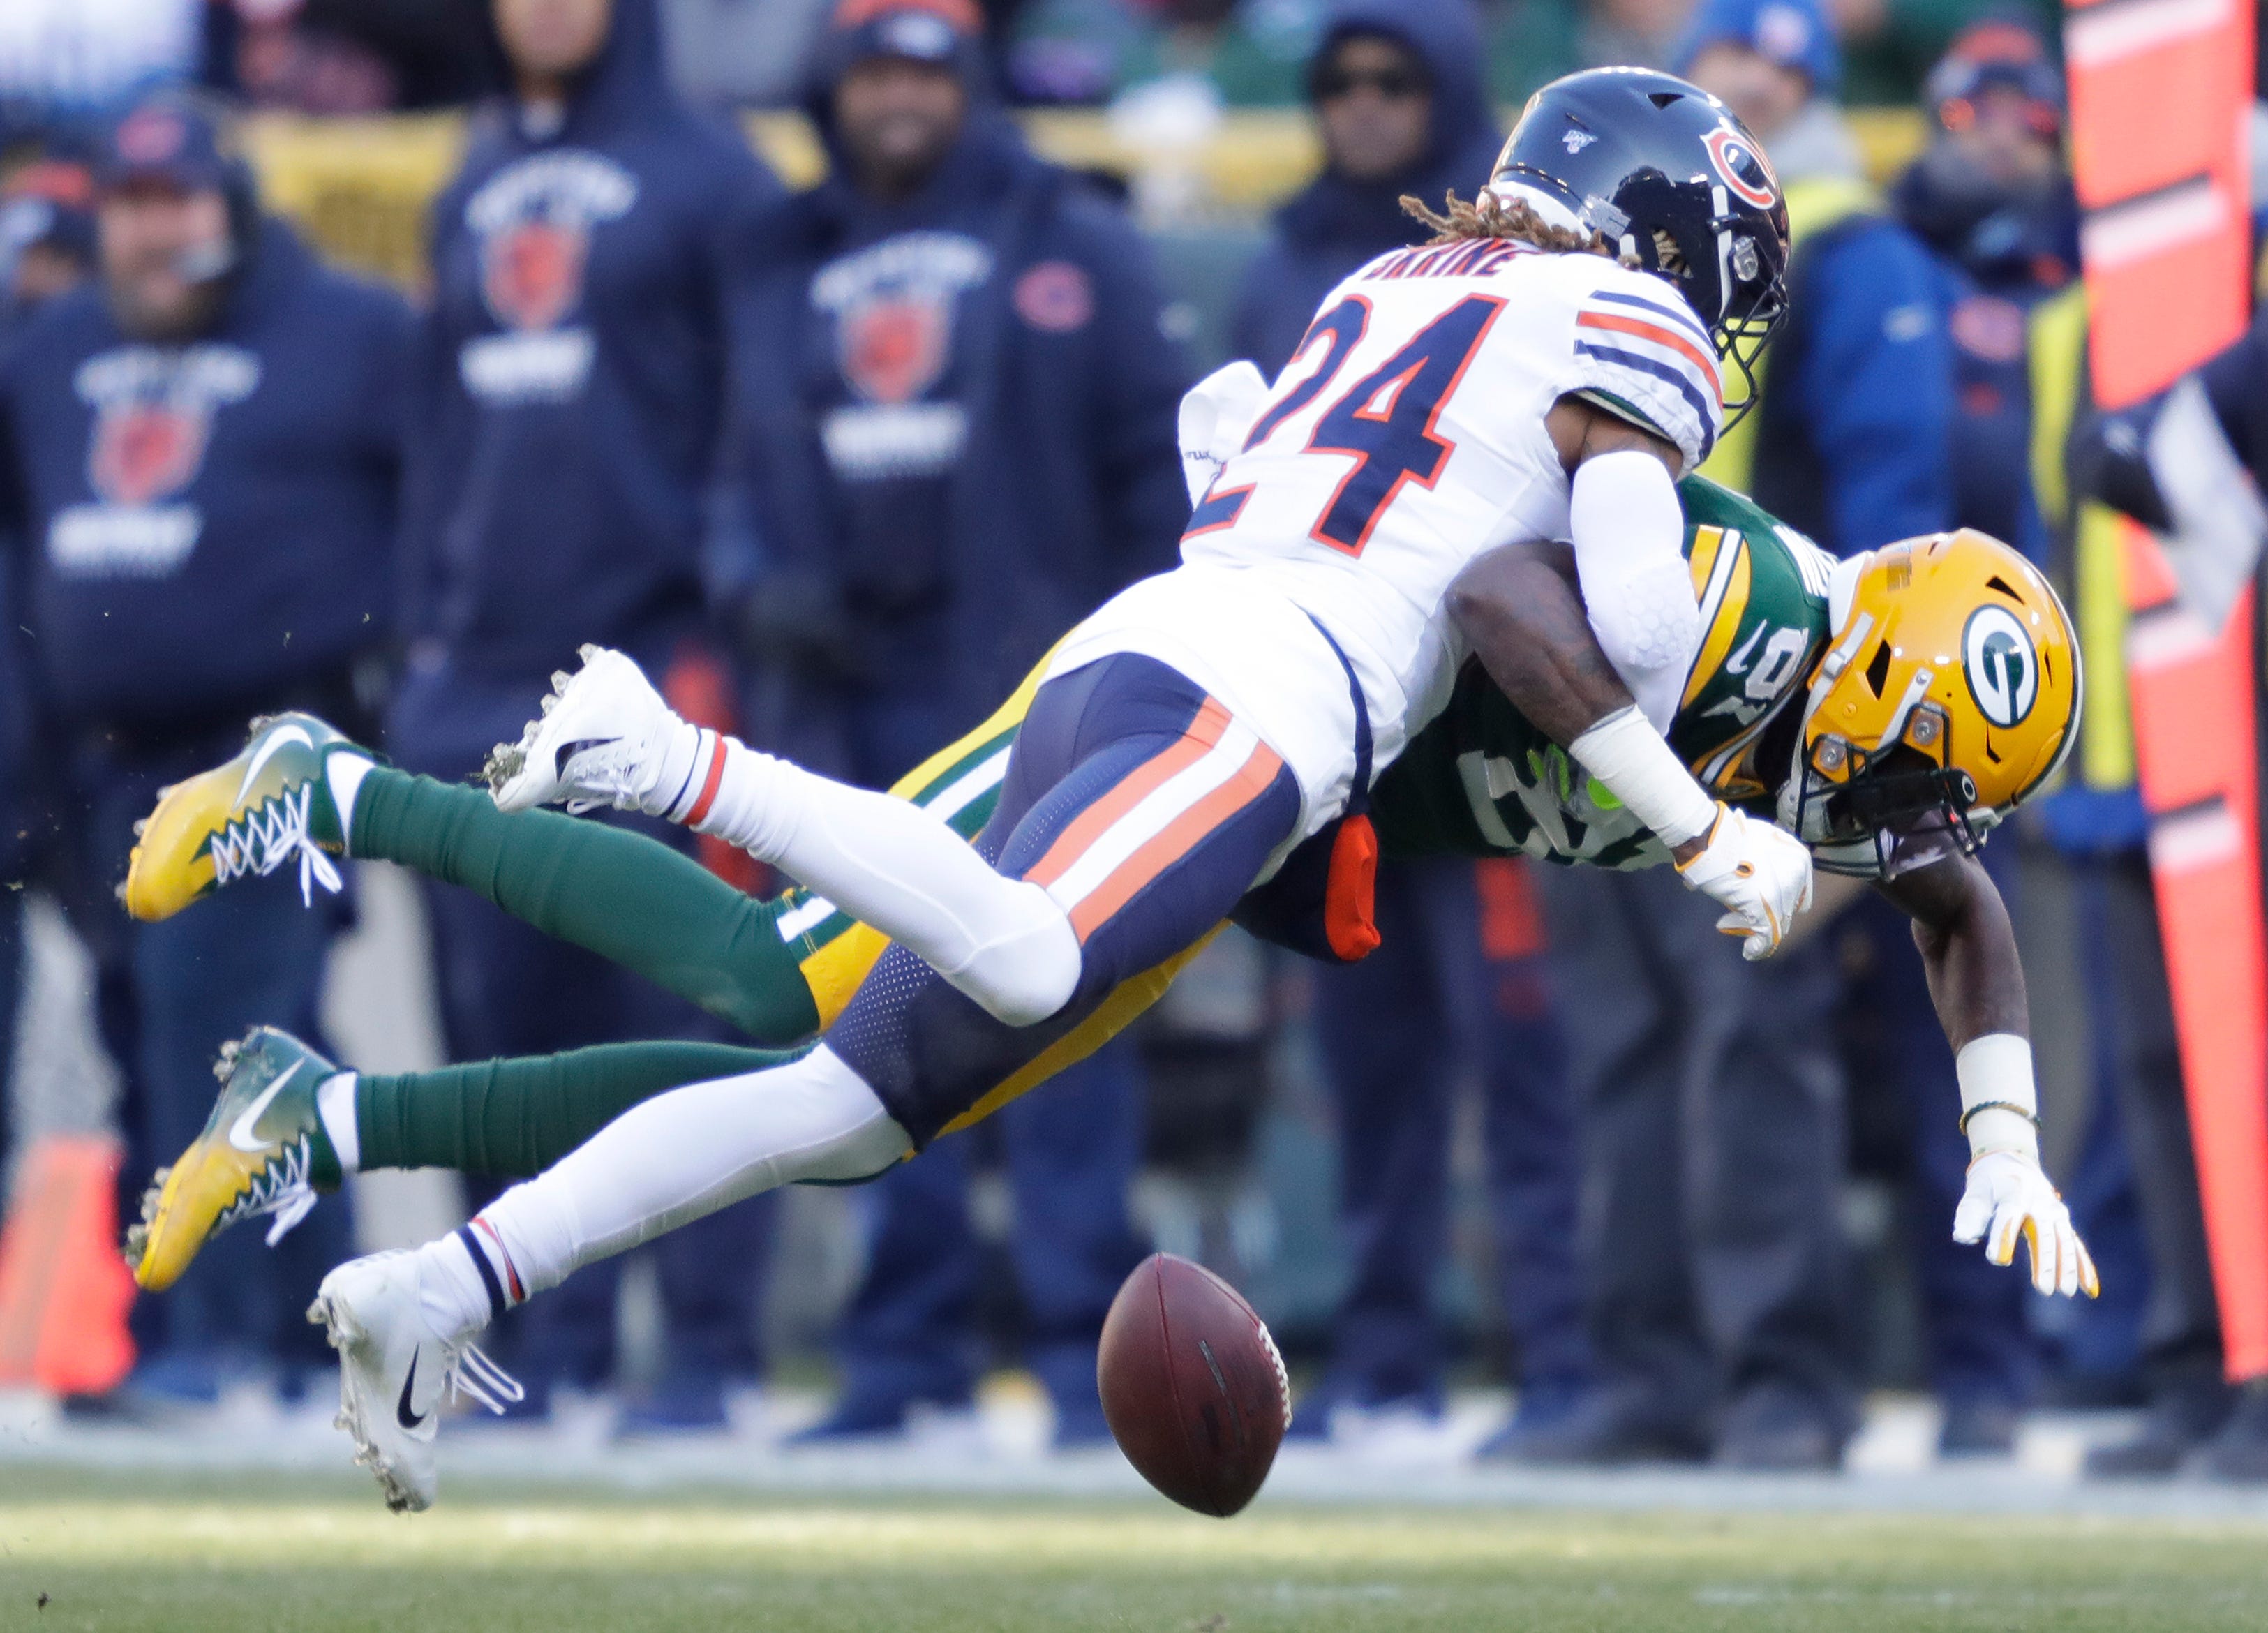 Green Bay Packers wide receiver Geronimo Allison (81) drops a pass as he is hit by Chicago Bears cornerback Buster Skrine (24) Sunday, December 15, 2019, at Lambeau Field in Green Bay, Wis.